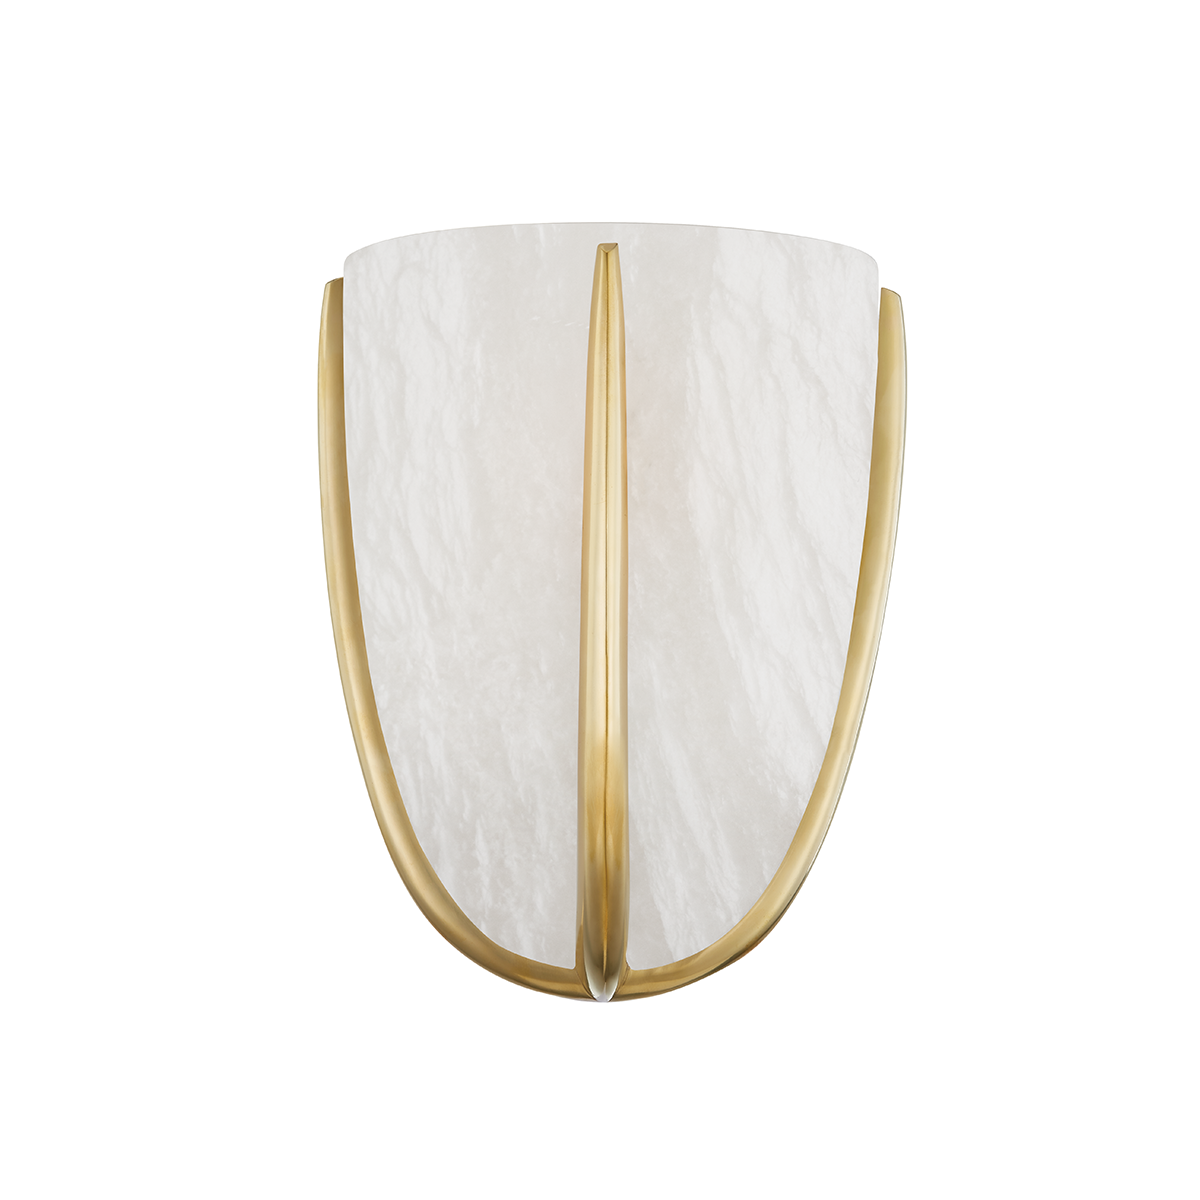 Hudson Valley, Wheatley 1 Light Wall Sconce